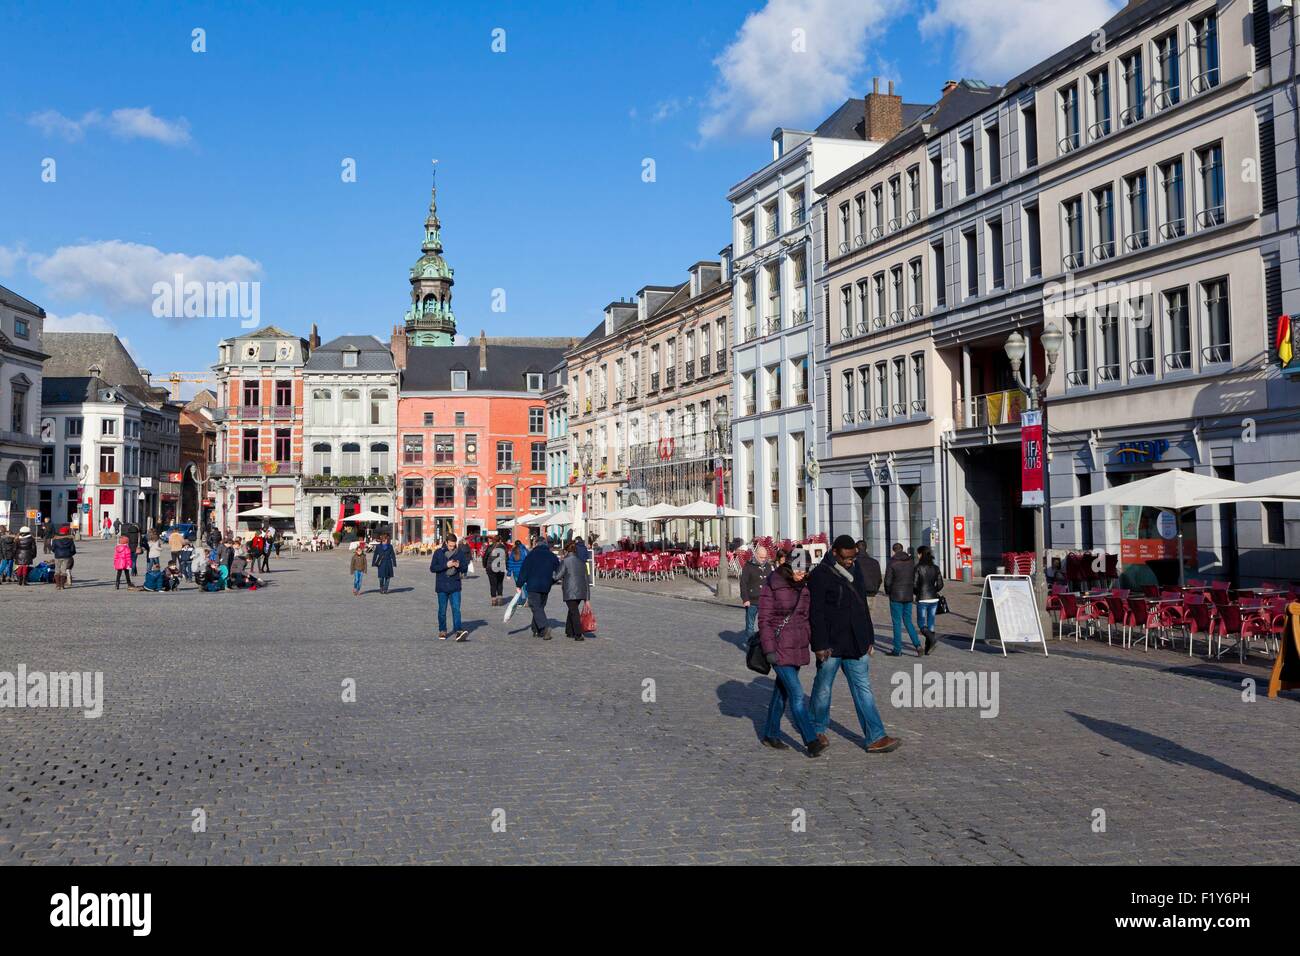 Belgium, Wallonia, Hainaut province, Mons, European Capital of Culture 2015, historical center, bell tower of the St Elisabeth church and grand Place Stock Photo